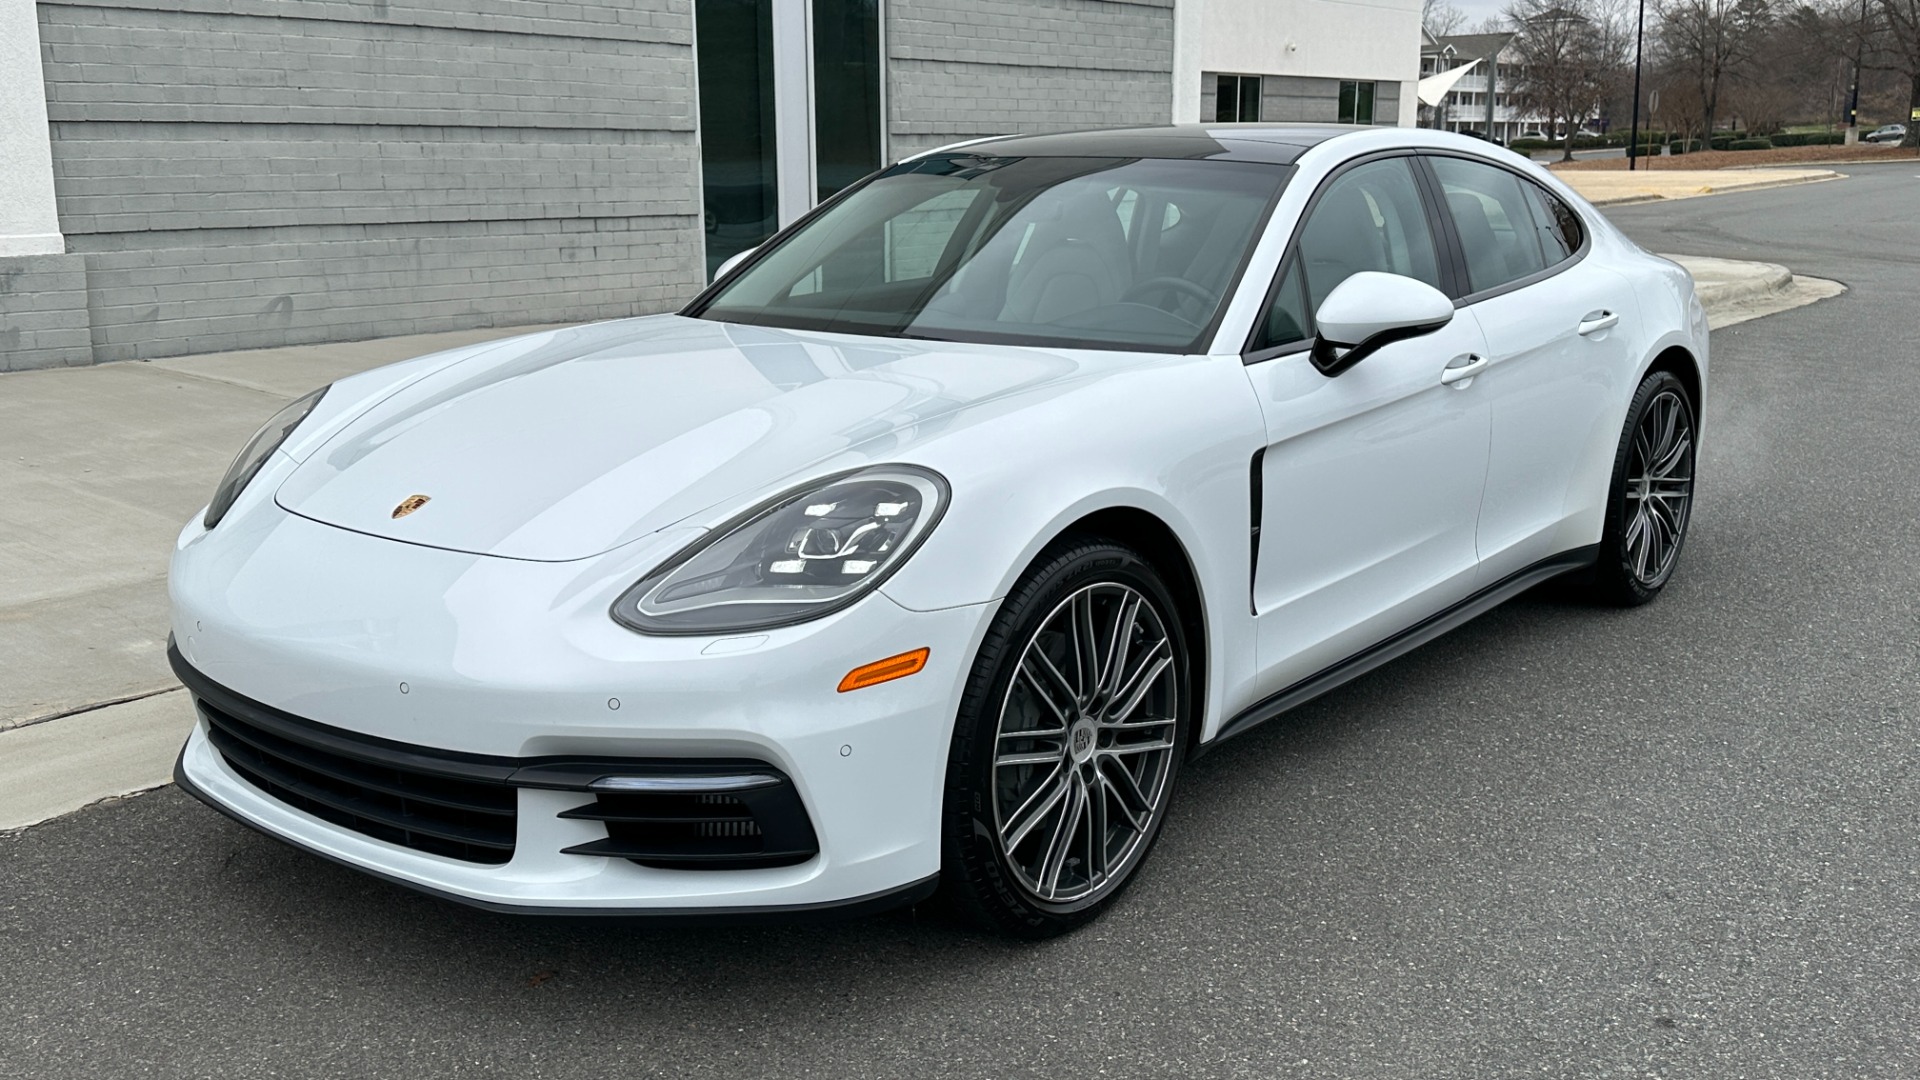 Used 2017 Porsche PANAMERA 4S / AWD / 2.9L TURBO / PREMIUM / SPORT CHRONO / BOSE / REARVIEW for sale $81,000 at Formula Imports in Charlotte NC 28227 2